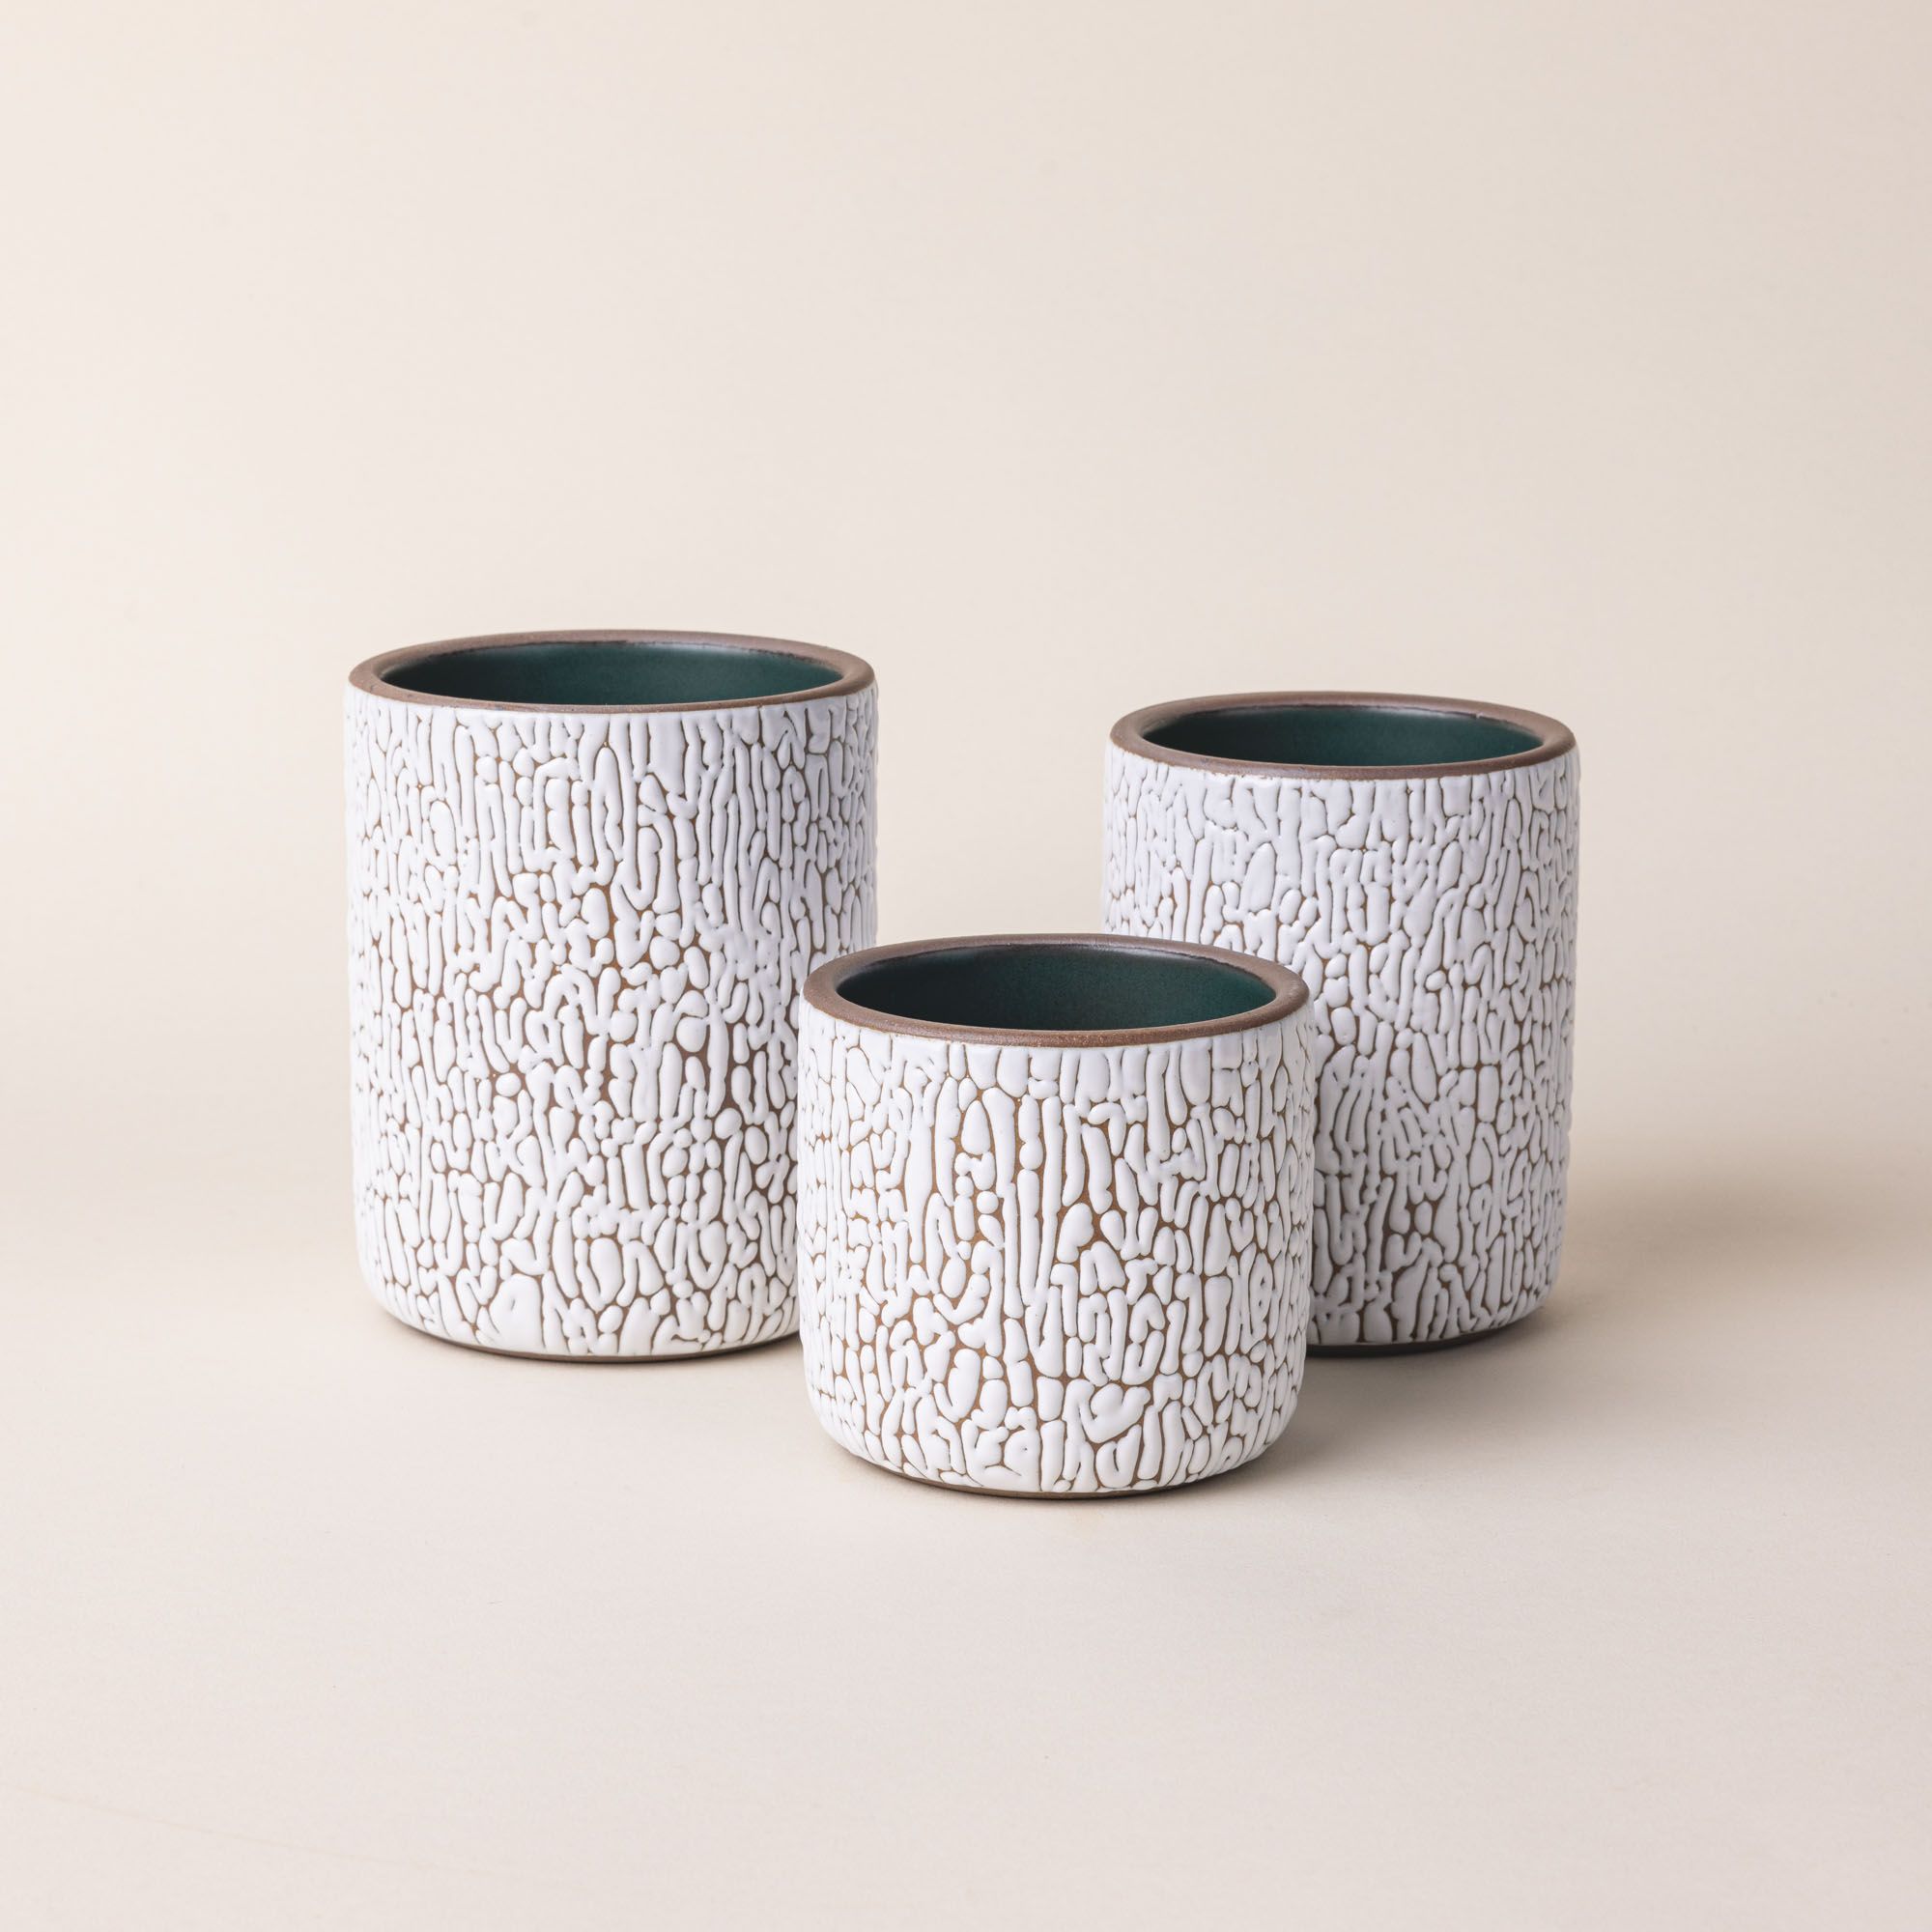 Three white ceramic vessels in Small, Medium, and Big with cracked texture and the interior being dark teal